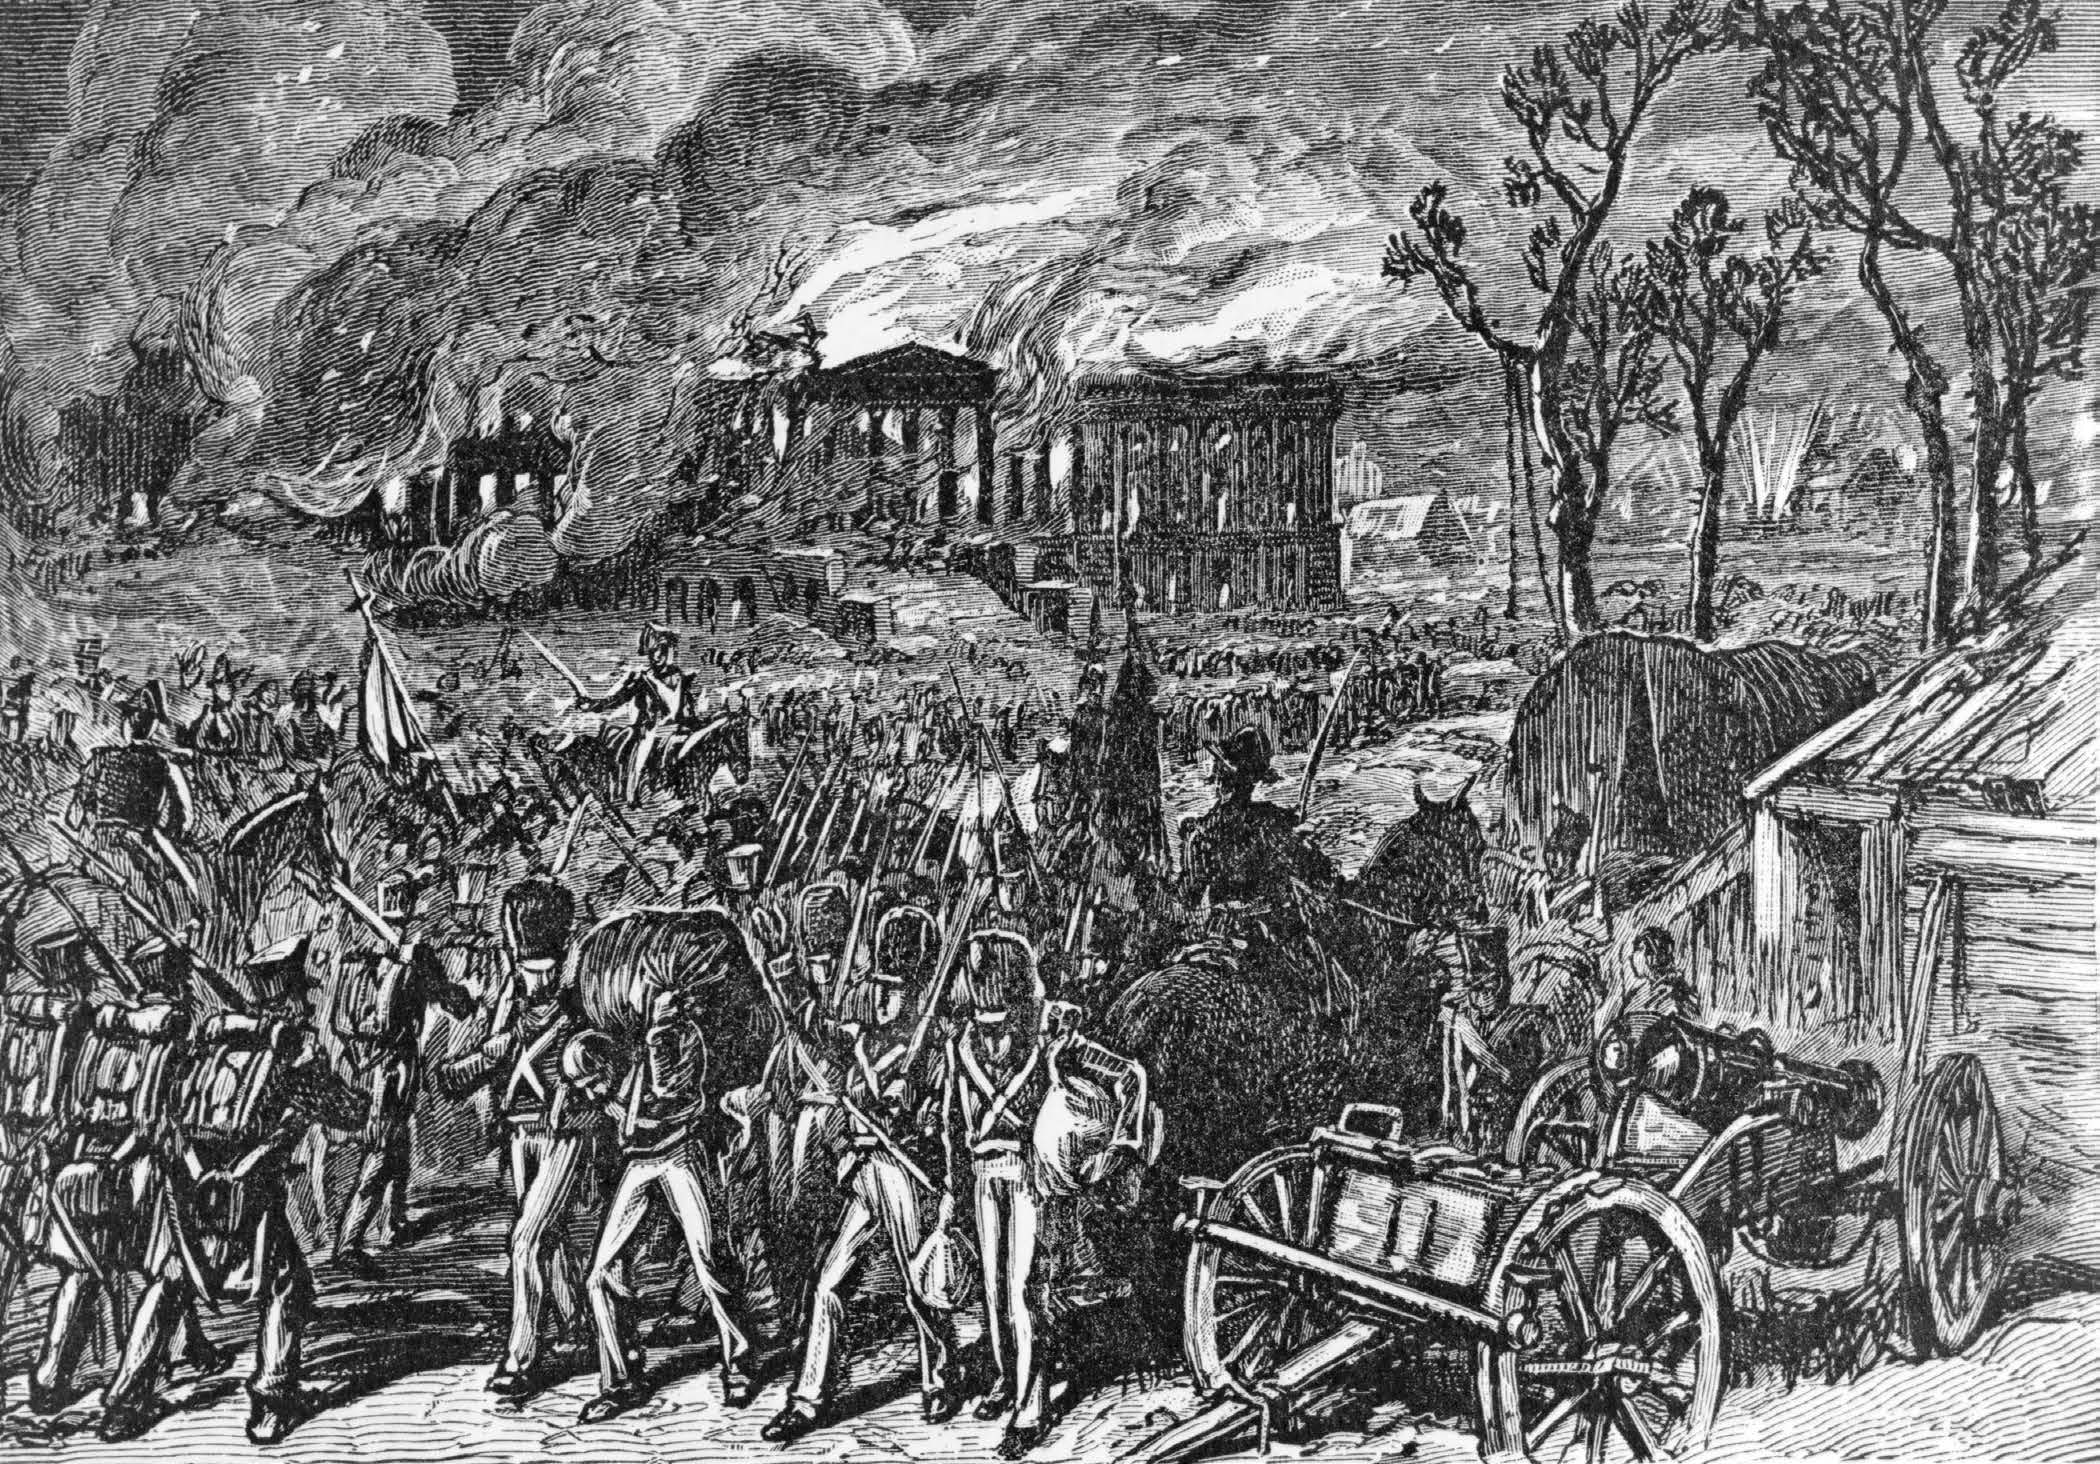 Capture and Burning of Washington by the British, in 1814 (wood engraving, 1876), by unknown artist.